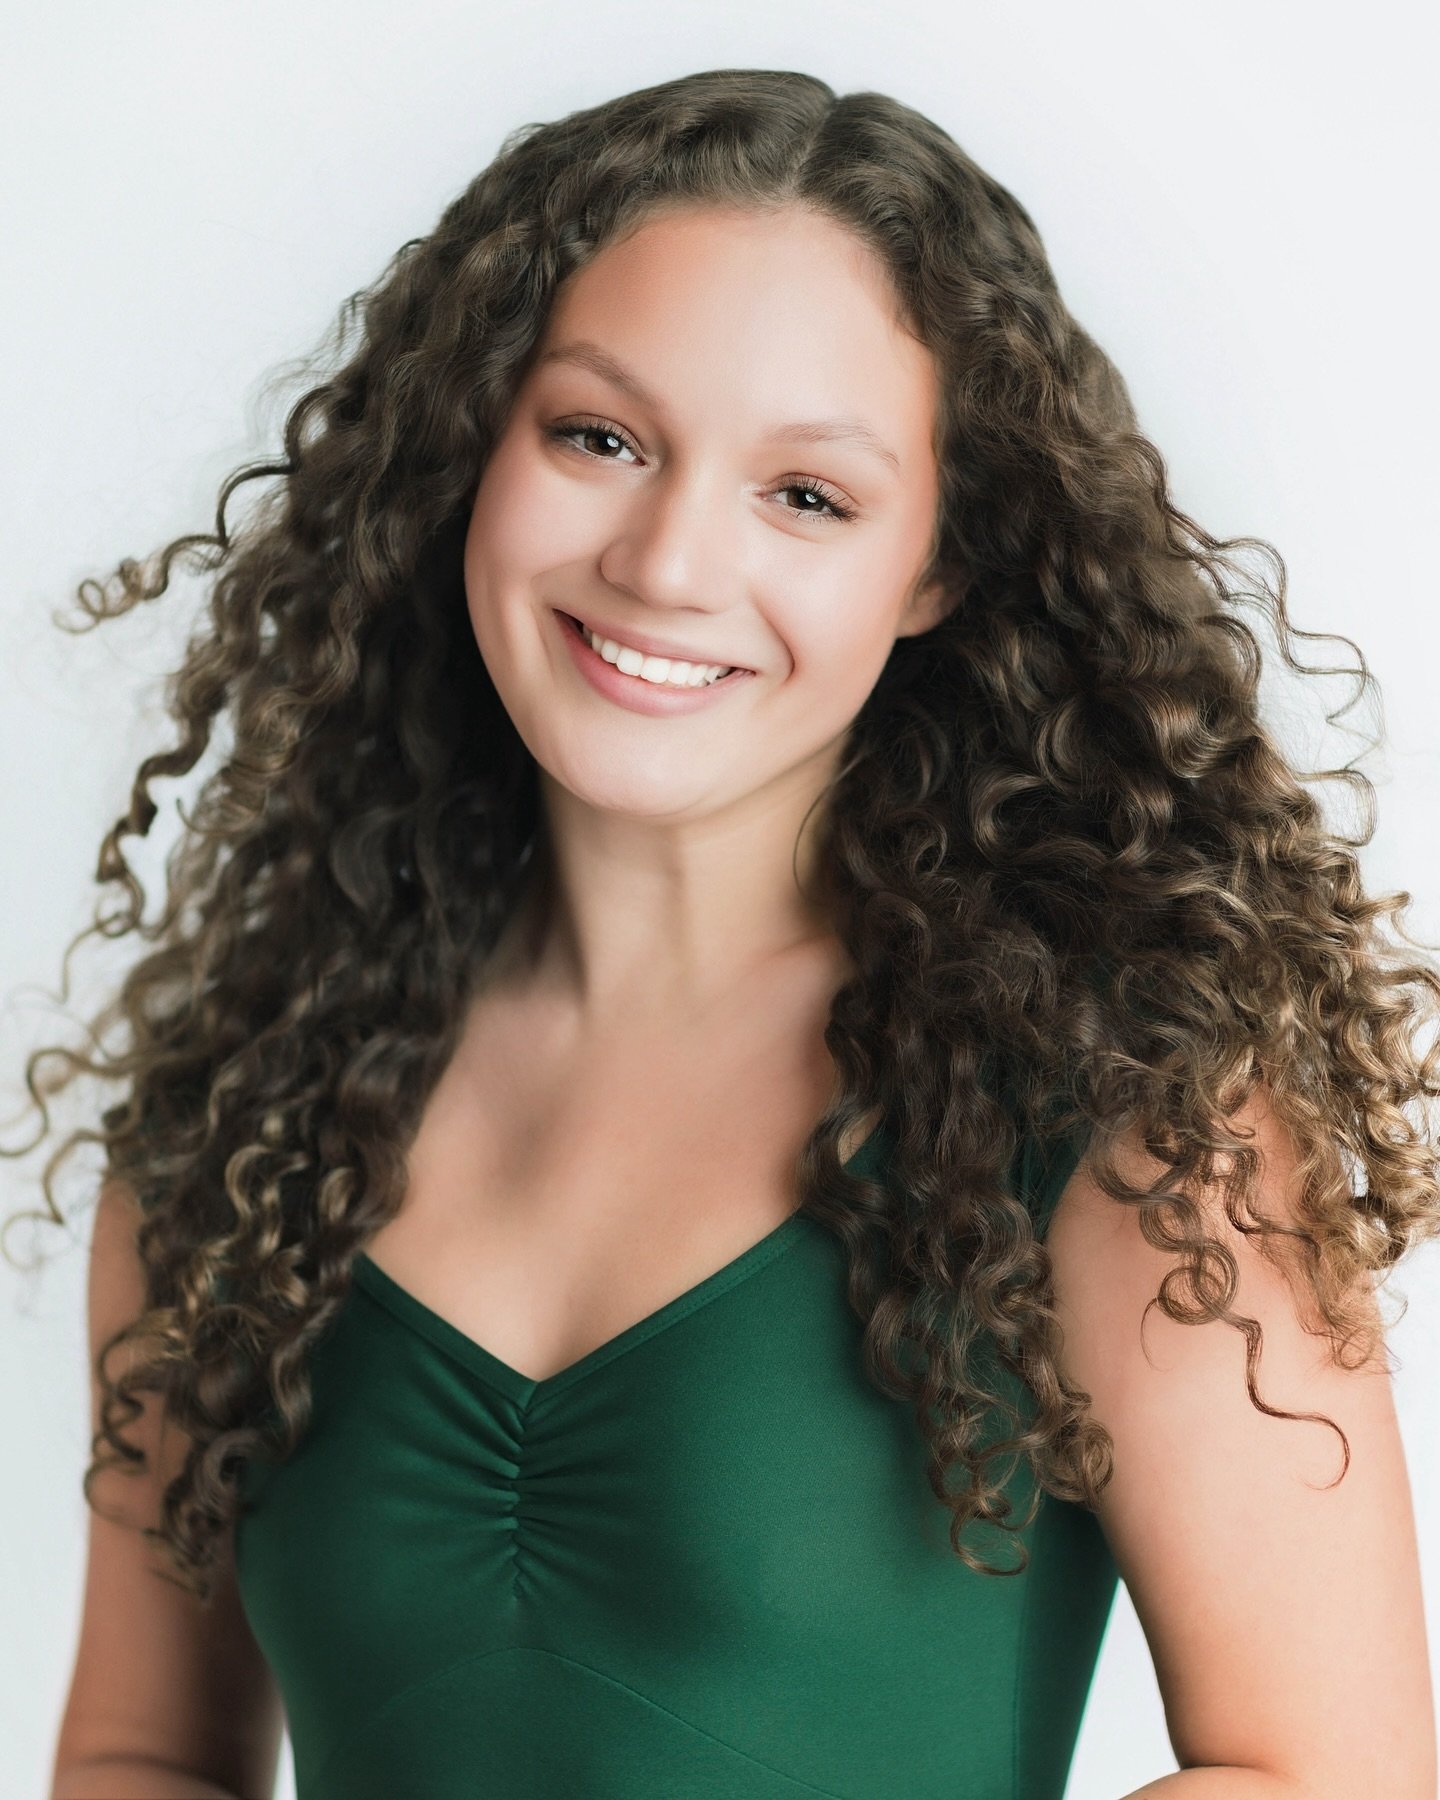 Update your headshots at least yearly, especially for the younger ones since they change so quickly ❤️

#headshots #danceheadshots #dancetaylorstudios #javinandco @javinandcompany @dancetaylorstudios @aubrie.raya